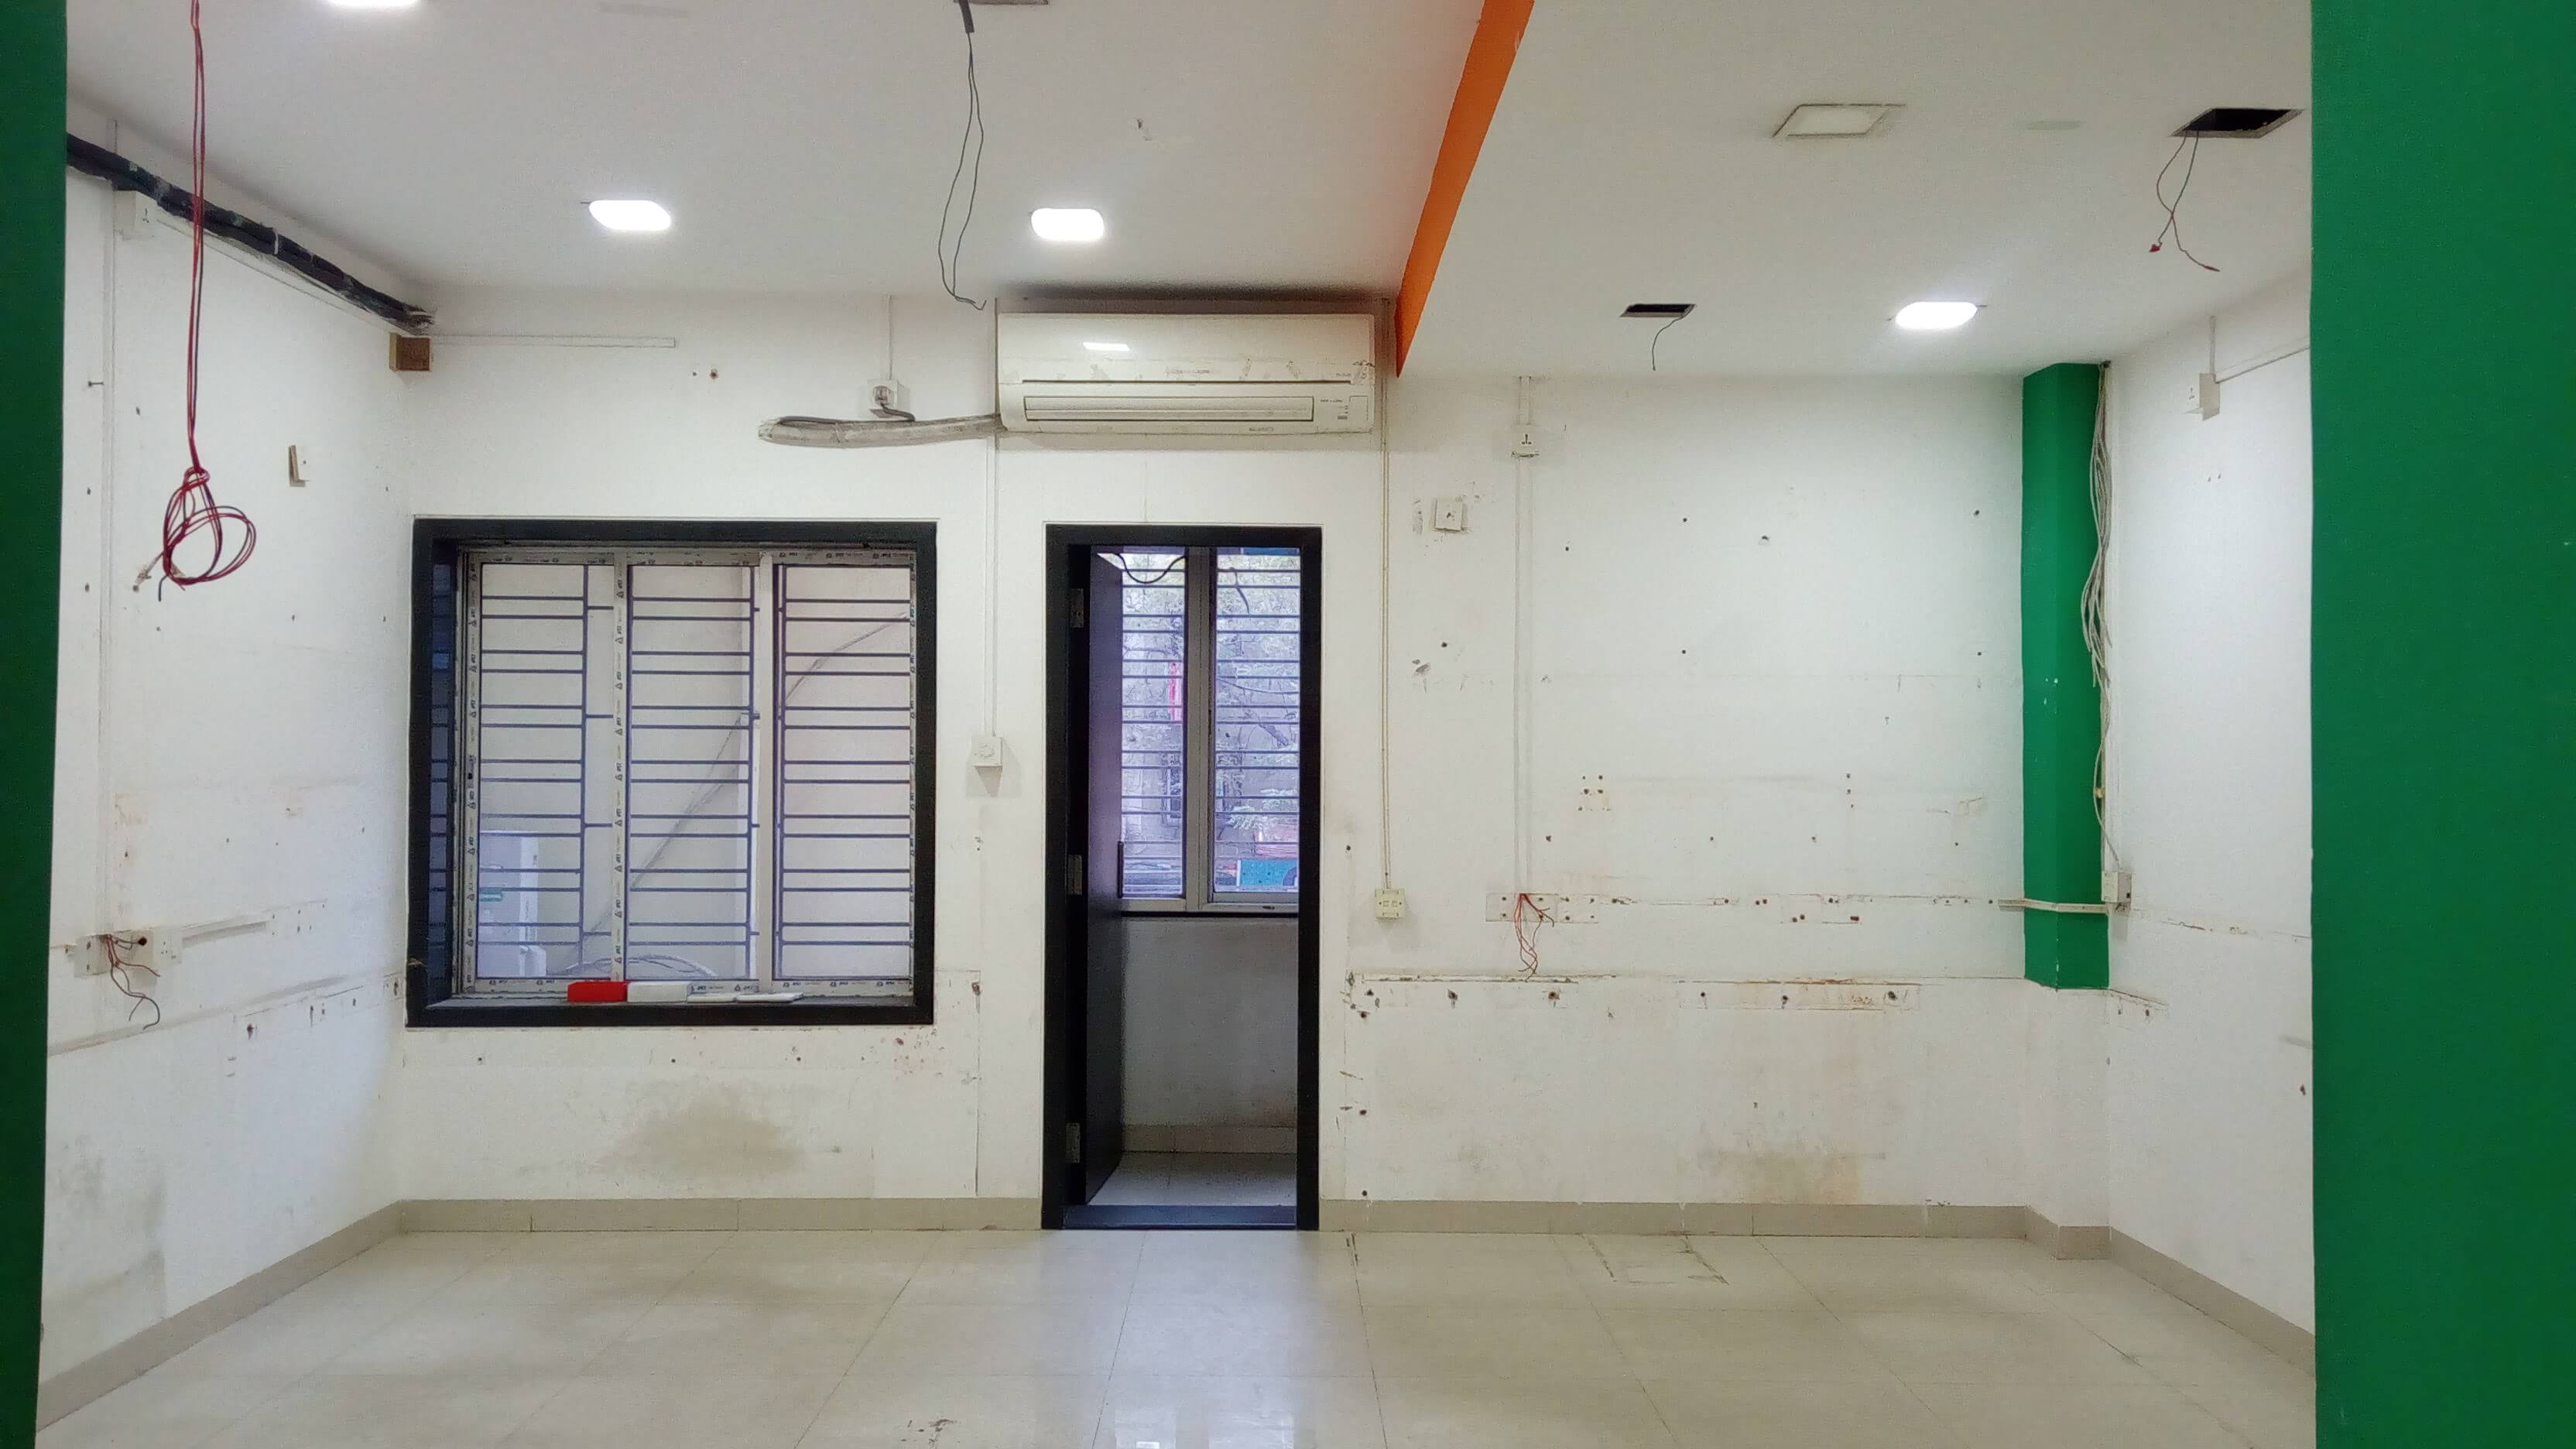 Office For Rent in Park Circus,Kolkata (Id:22258)